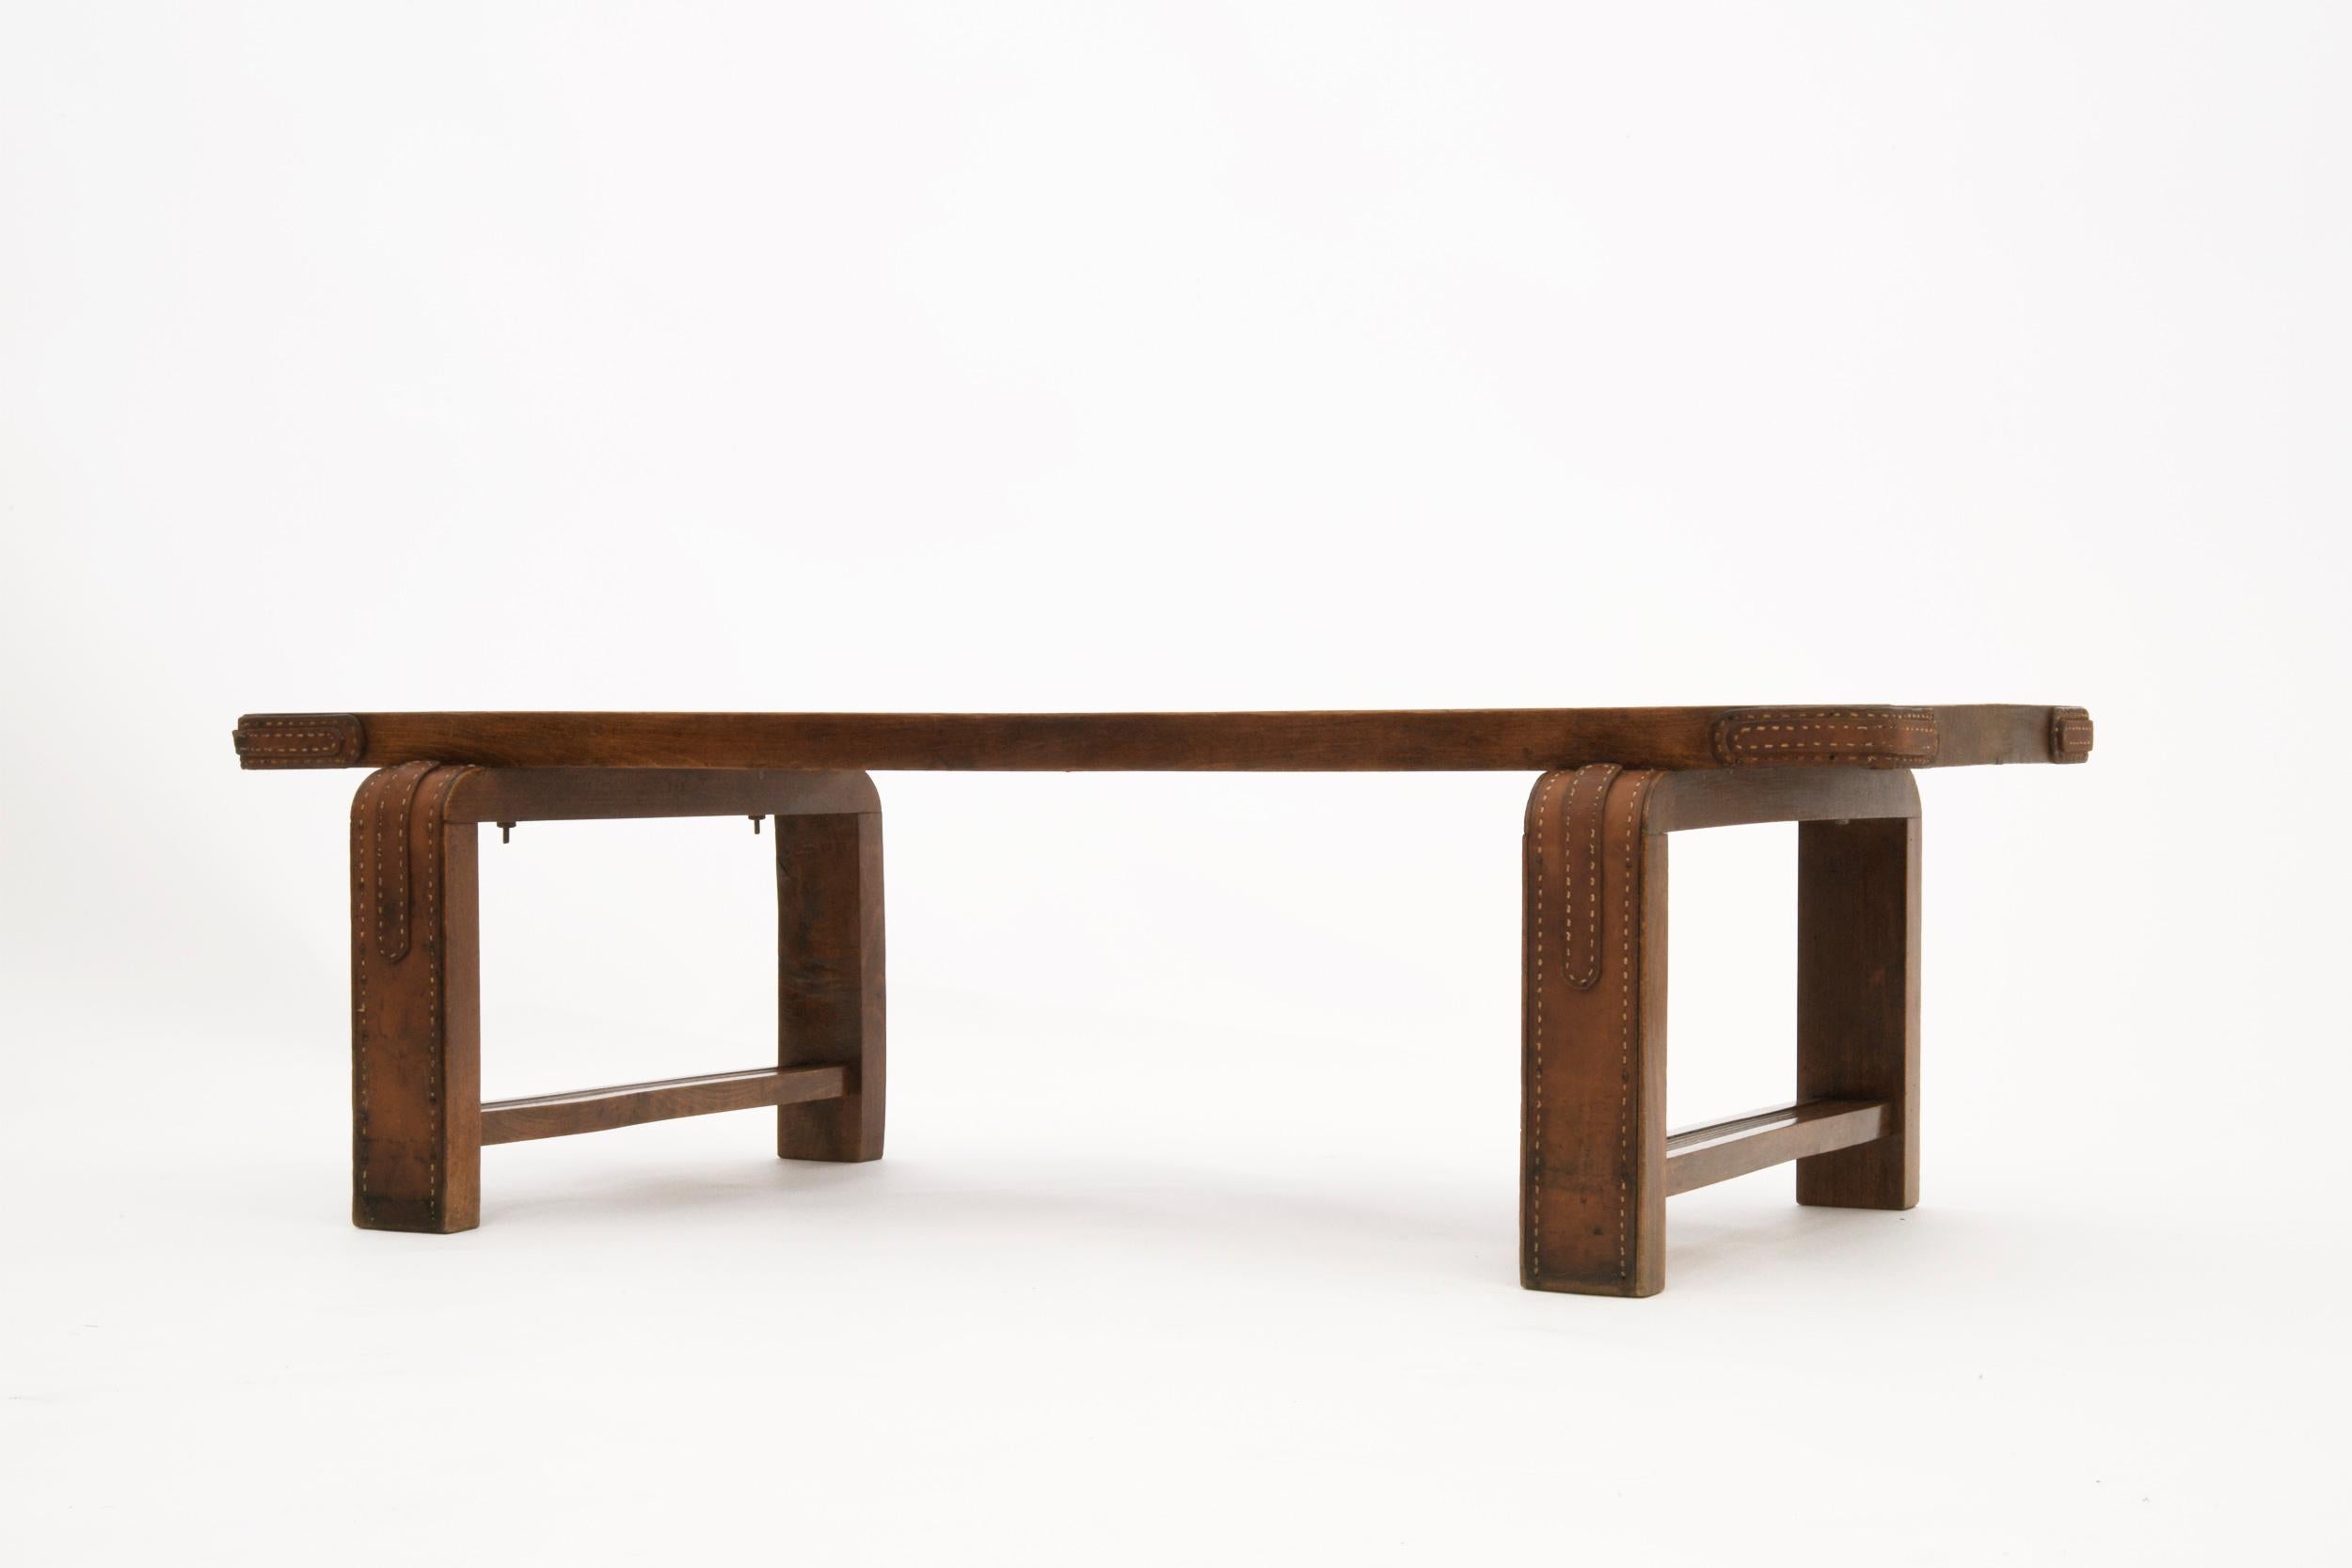 French Jacques Adnet, Luggage Bench, circa 1950